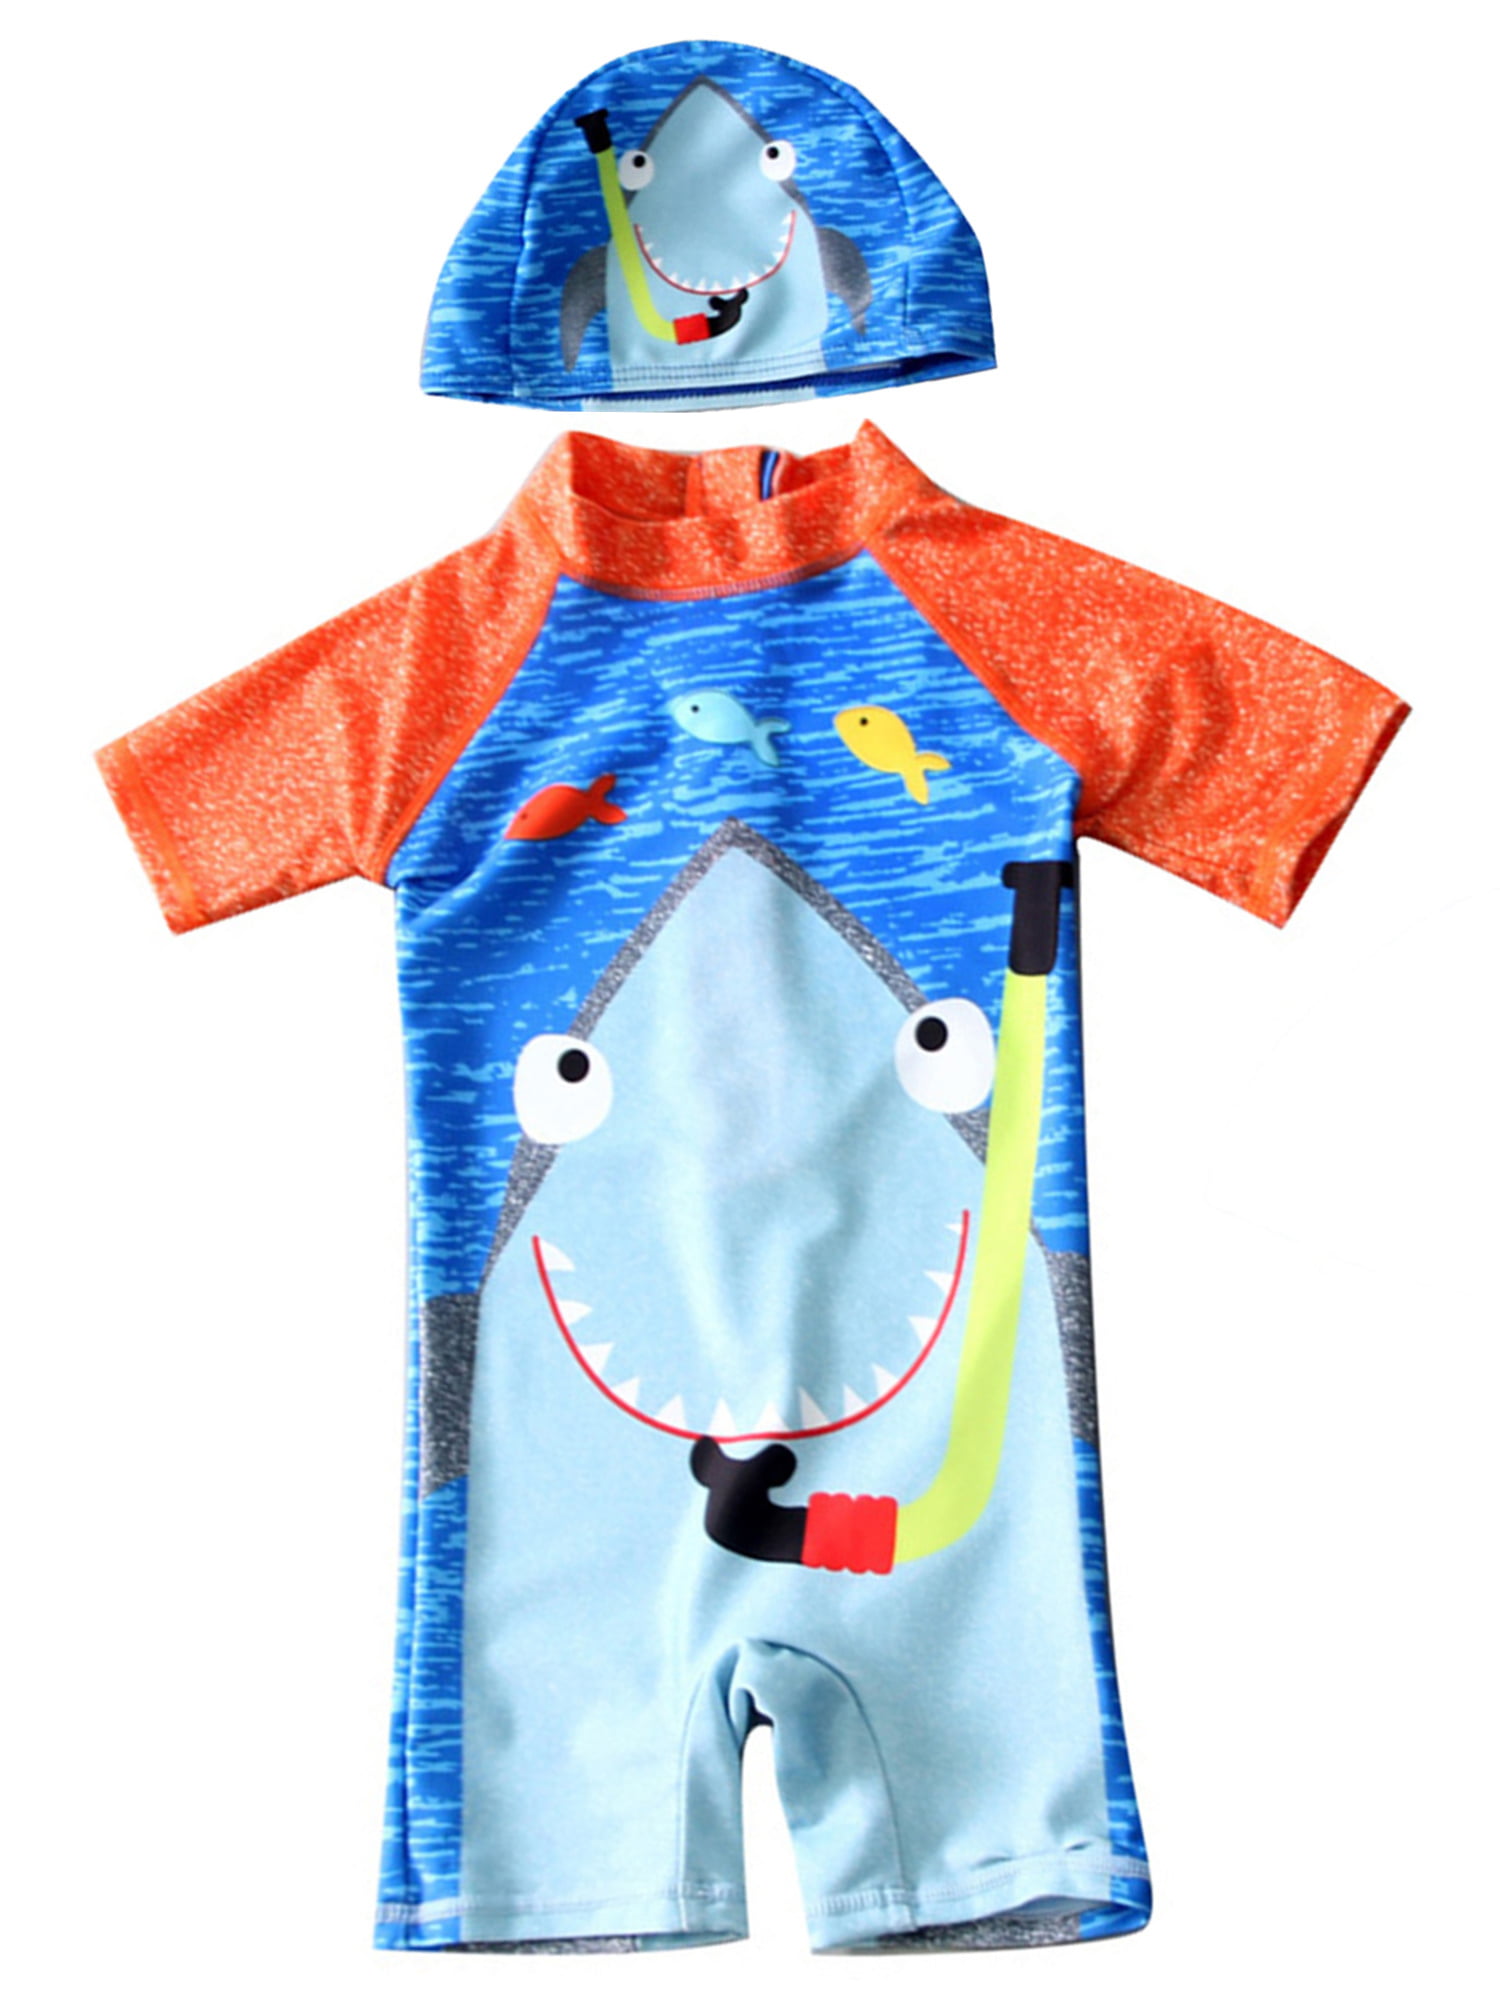 Baby Boy Hooded Sunsuits UPF 50 Infant and Toddler Sun Protective One Piece Swimwear with Zipper.